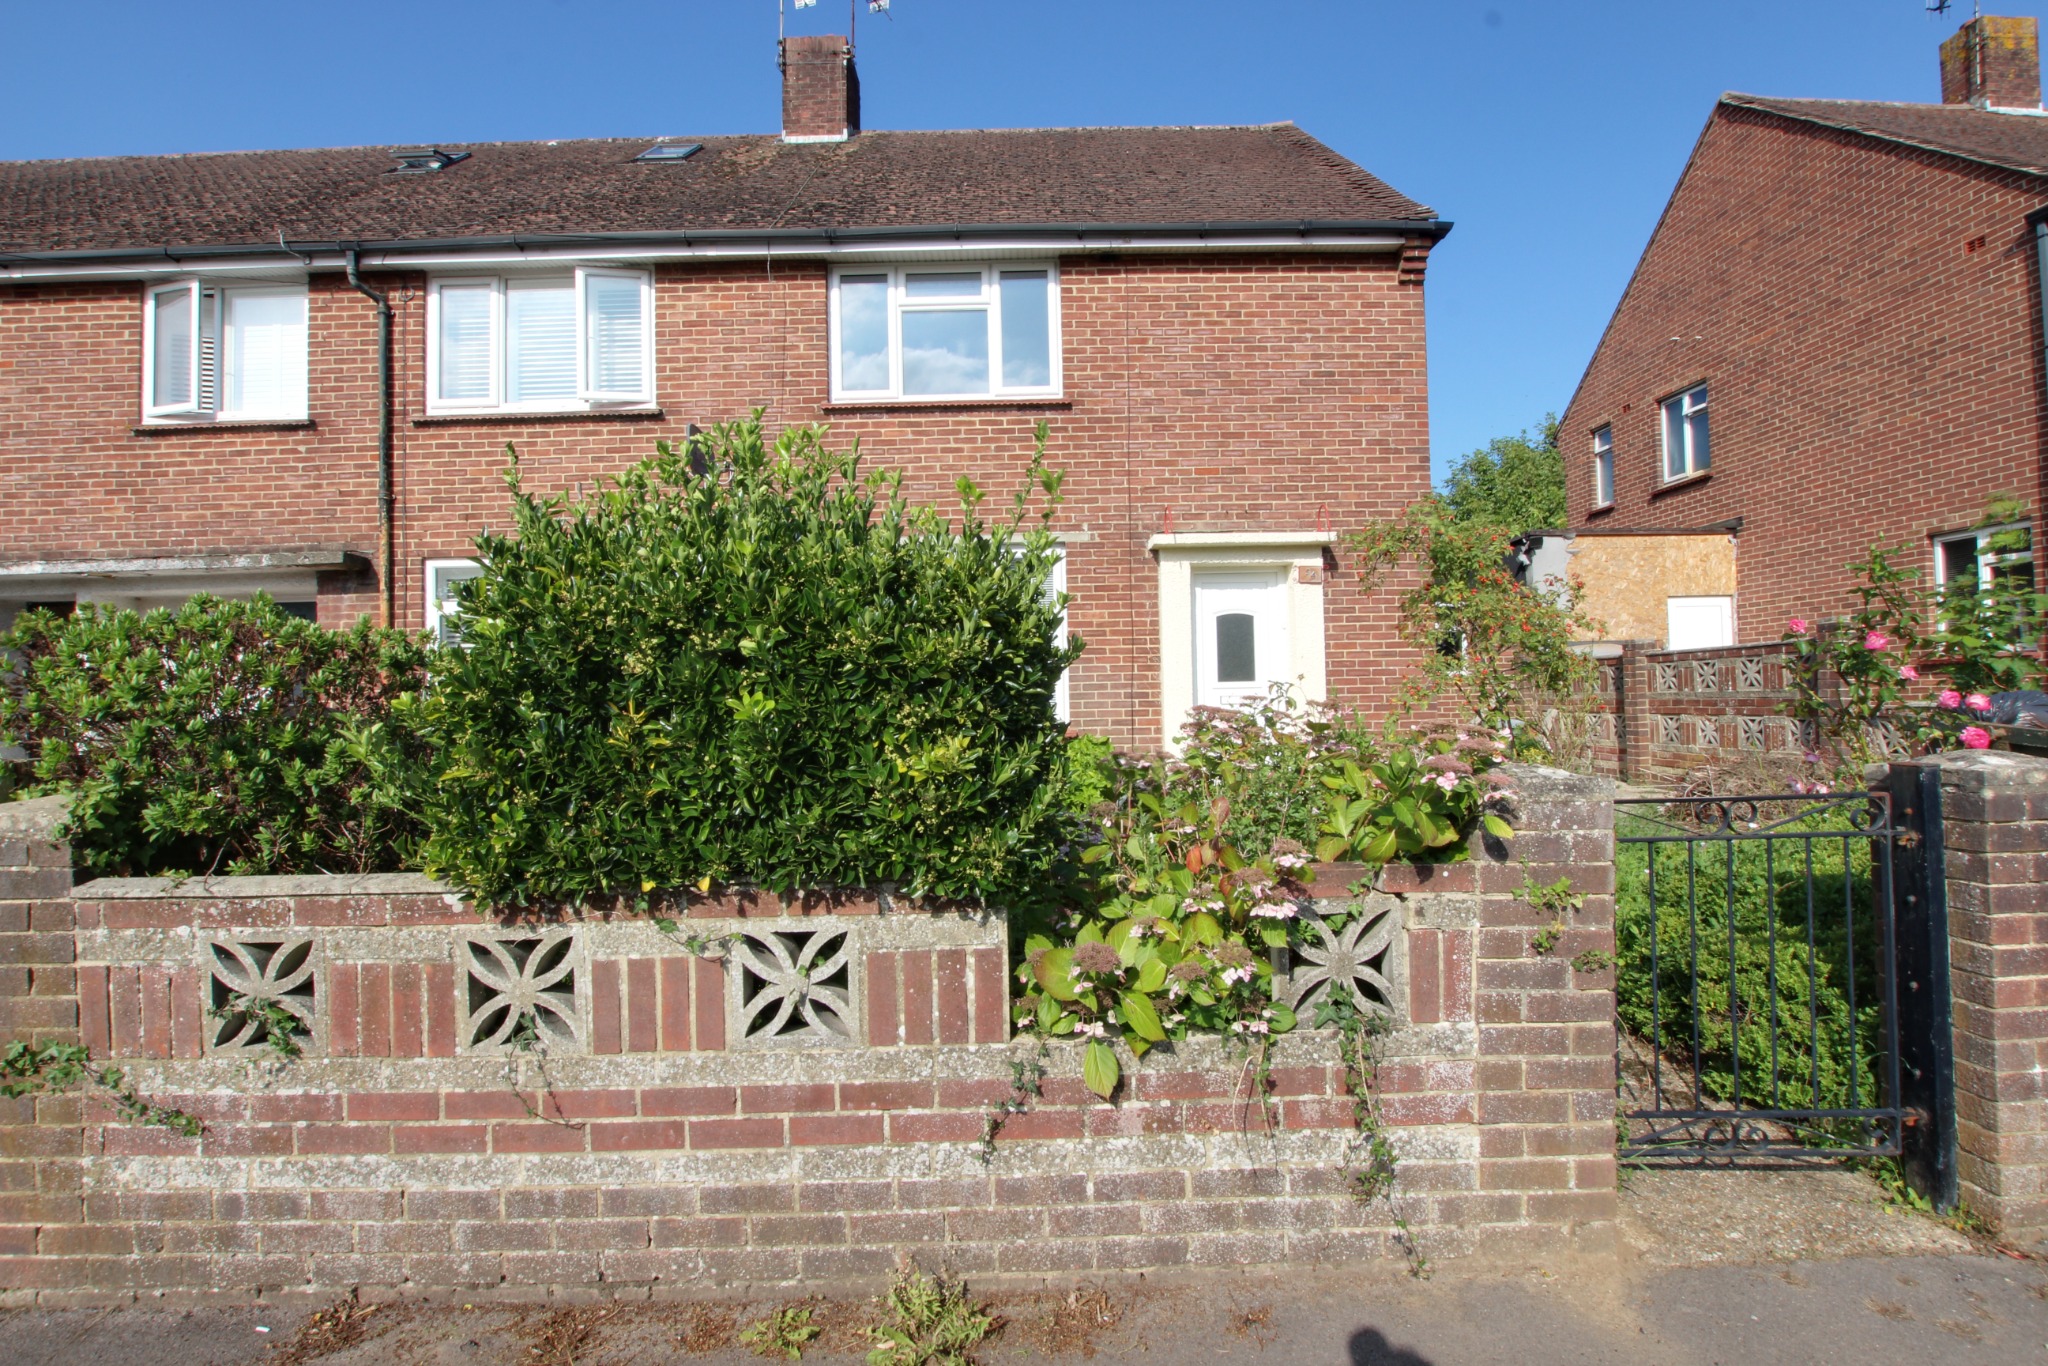 3 bed End Terraced House for rent in Havant. From Pearsons Estate Agents - Havant